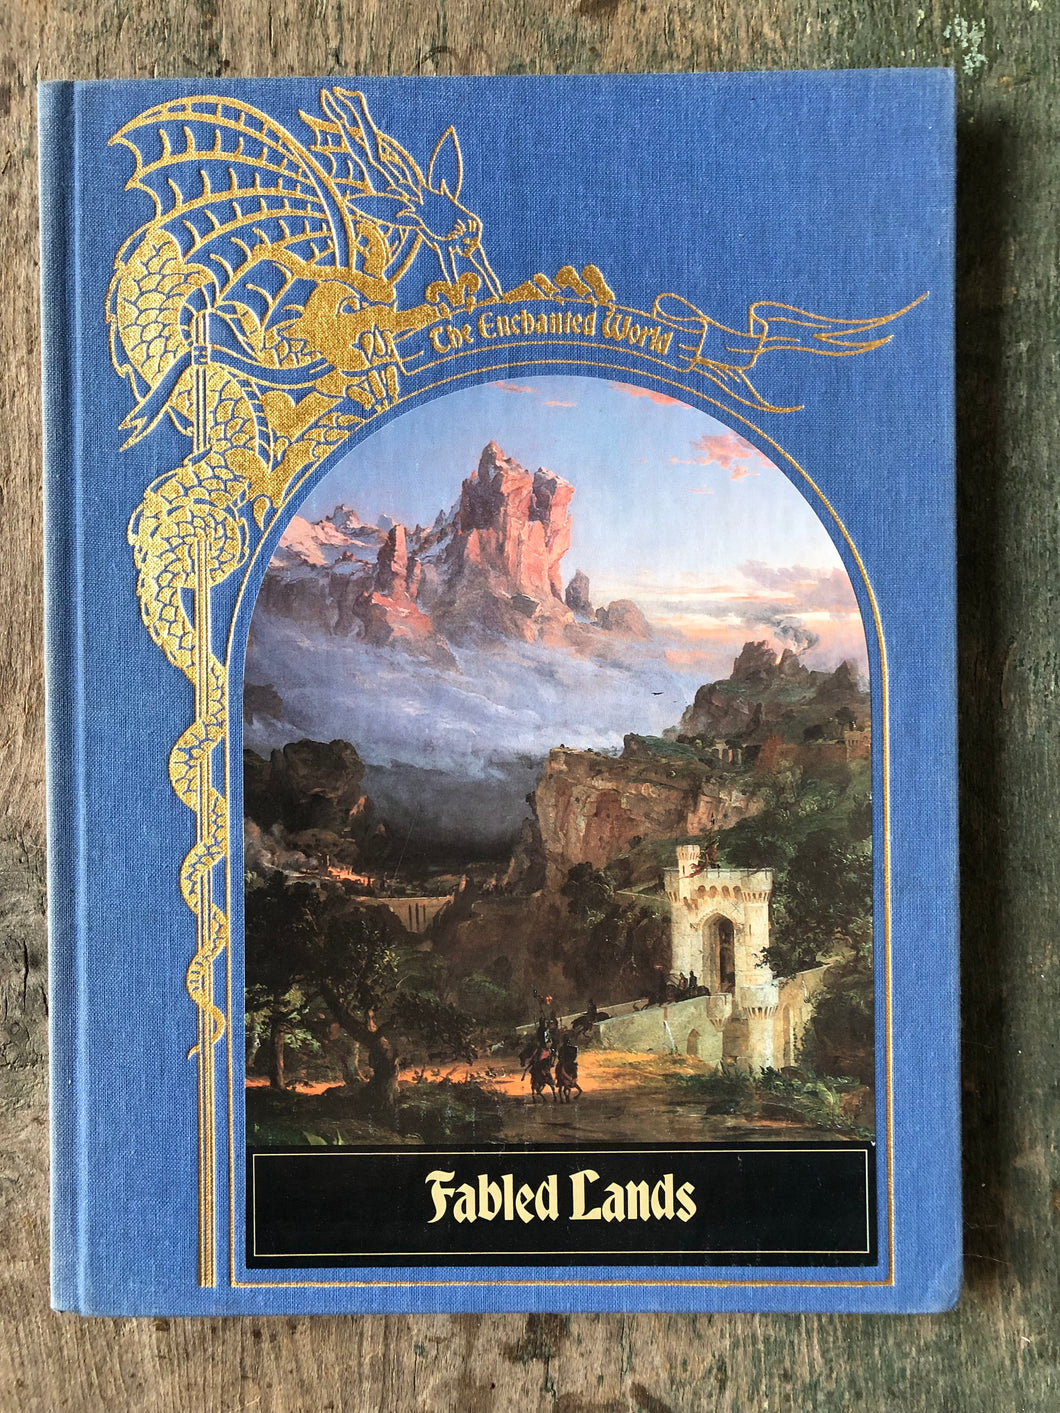 The Enchanted World: Fabled Lands by the Editors of Time-Life Books